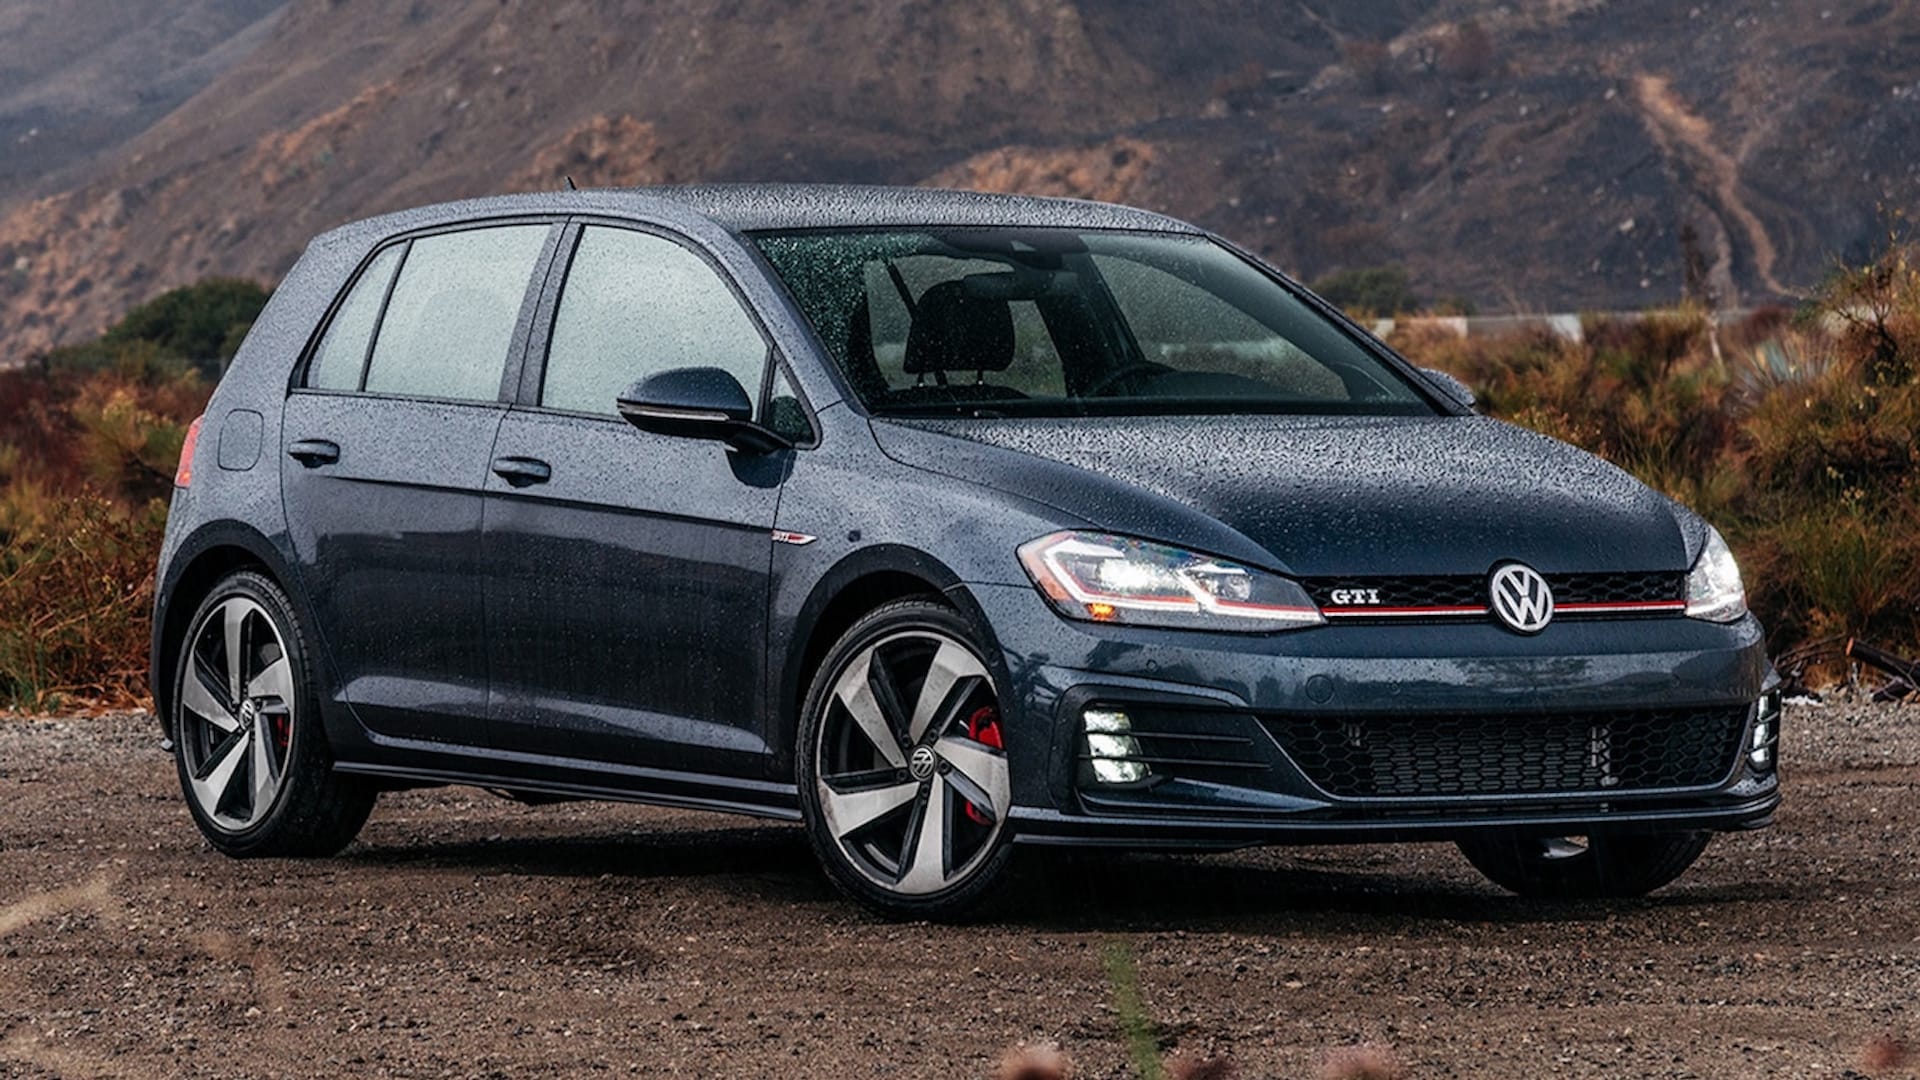 2021 Volkswagen Golf GTI Adds New Styling Cues and Infotainment Tech for  Its Final Year